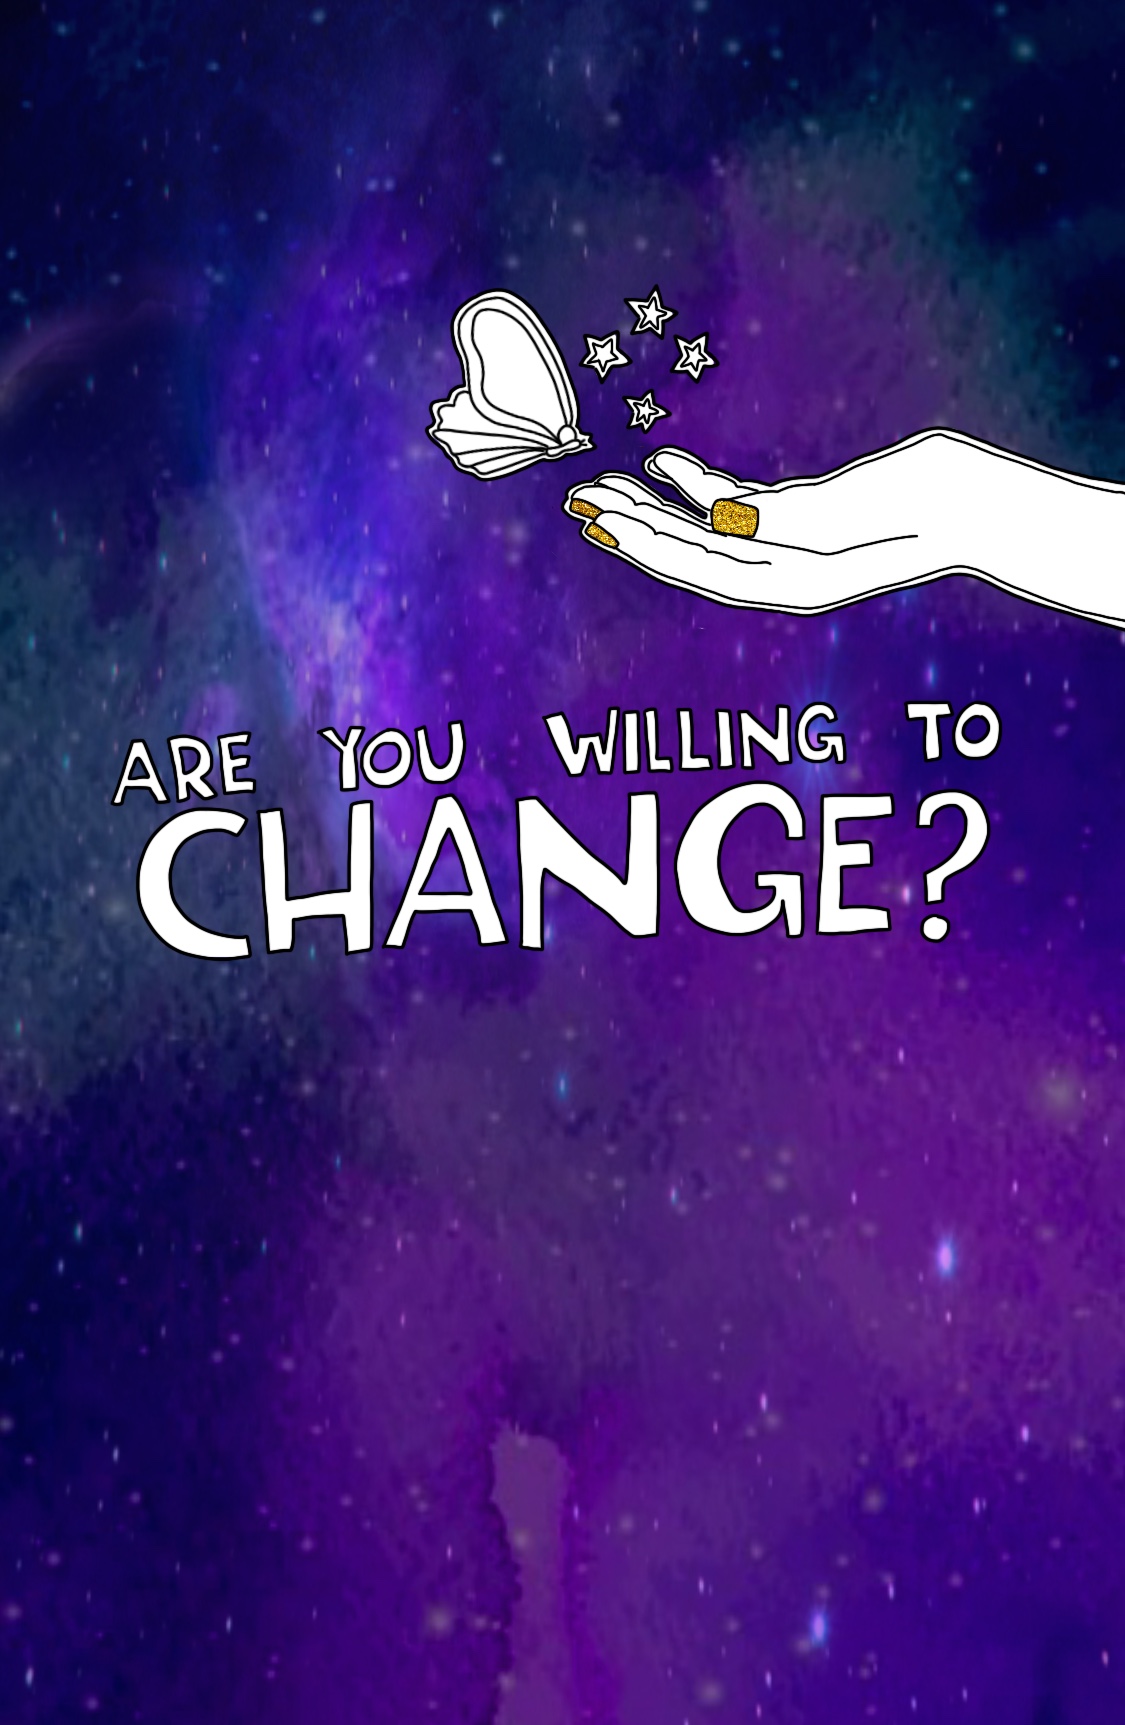 Journal Prompt: Are you willing to change?